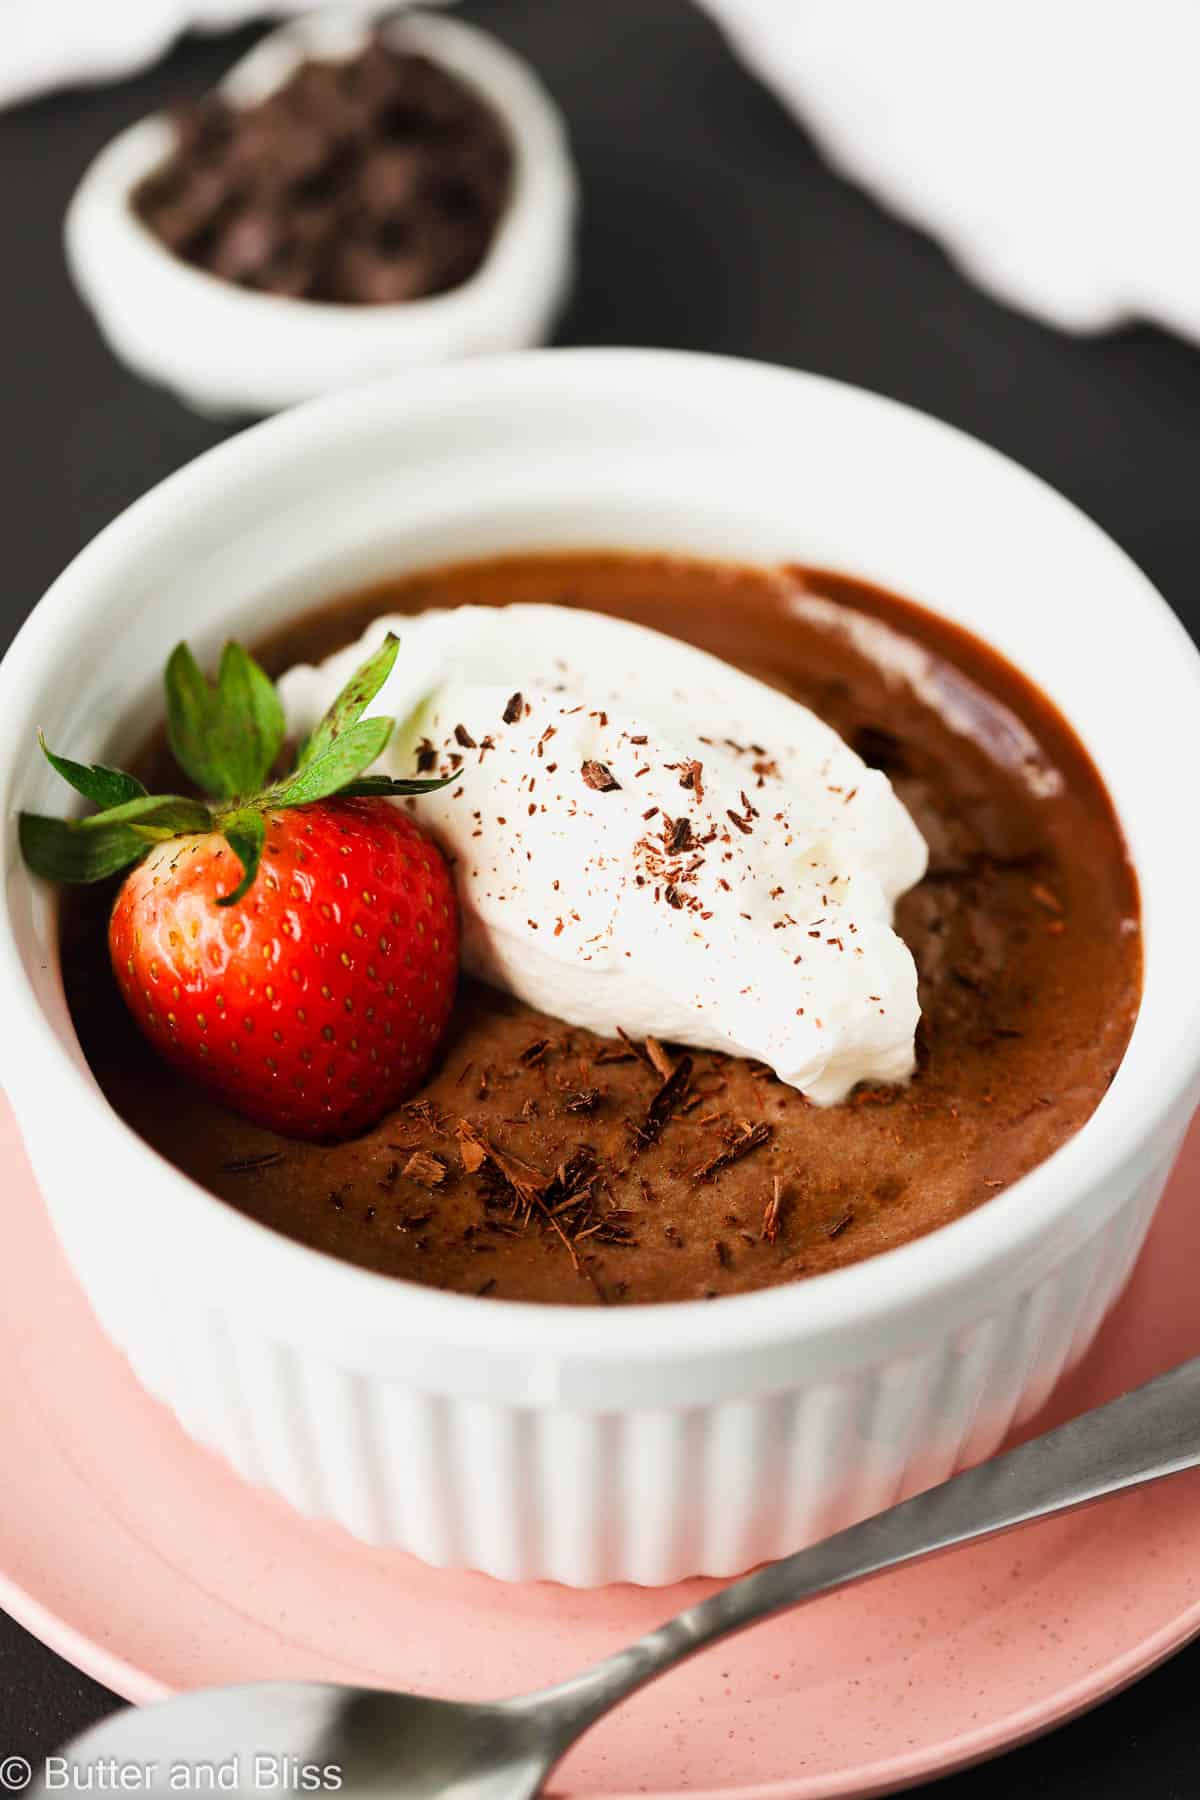 Creamy chocolate dessert for Valentine's Day in a white dish set on a pink plate.